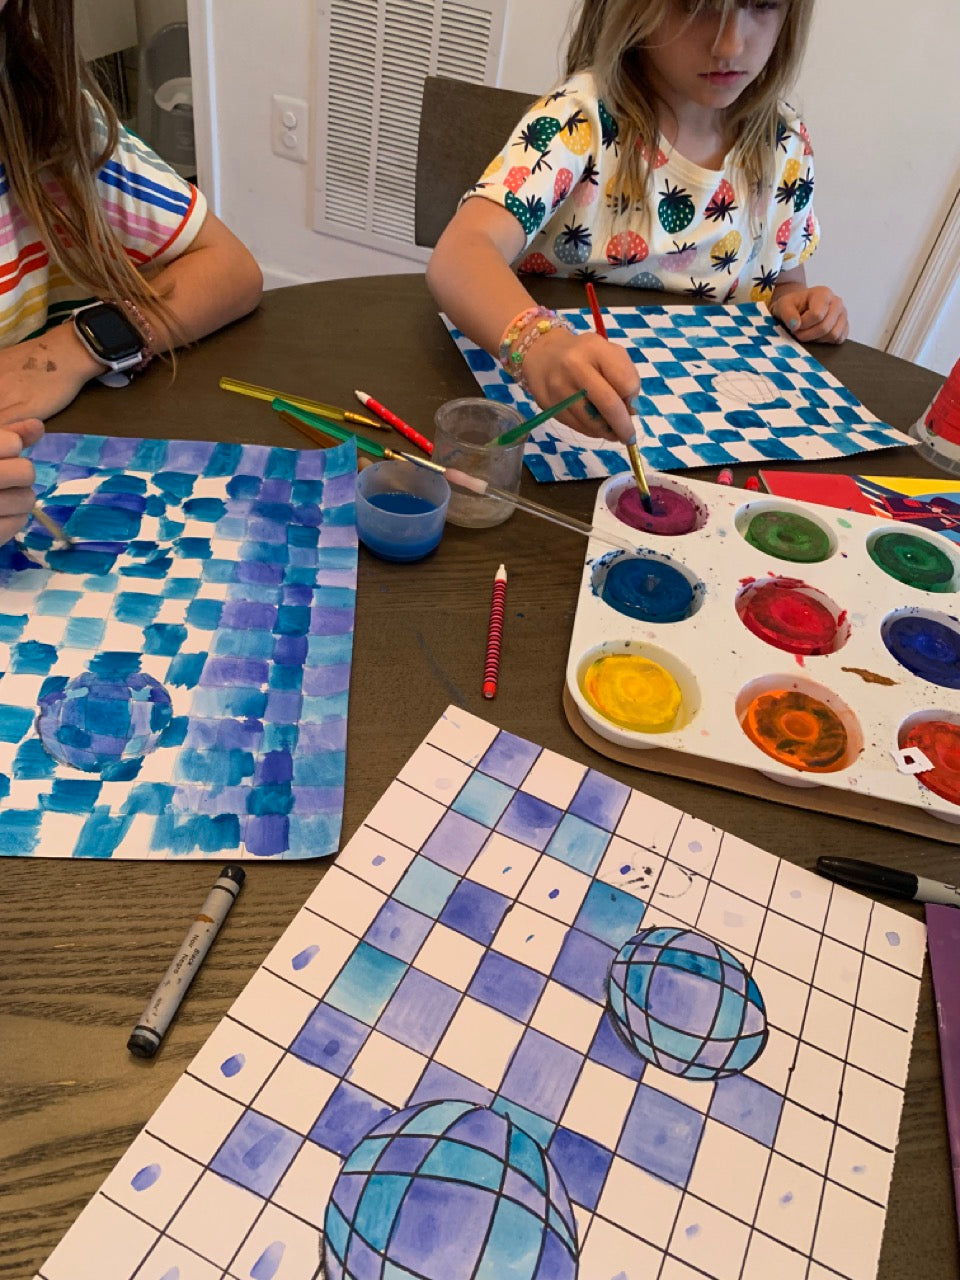 30 Unique Fifth Grade Art Projects To Tap Into Kids' Creativity